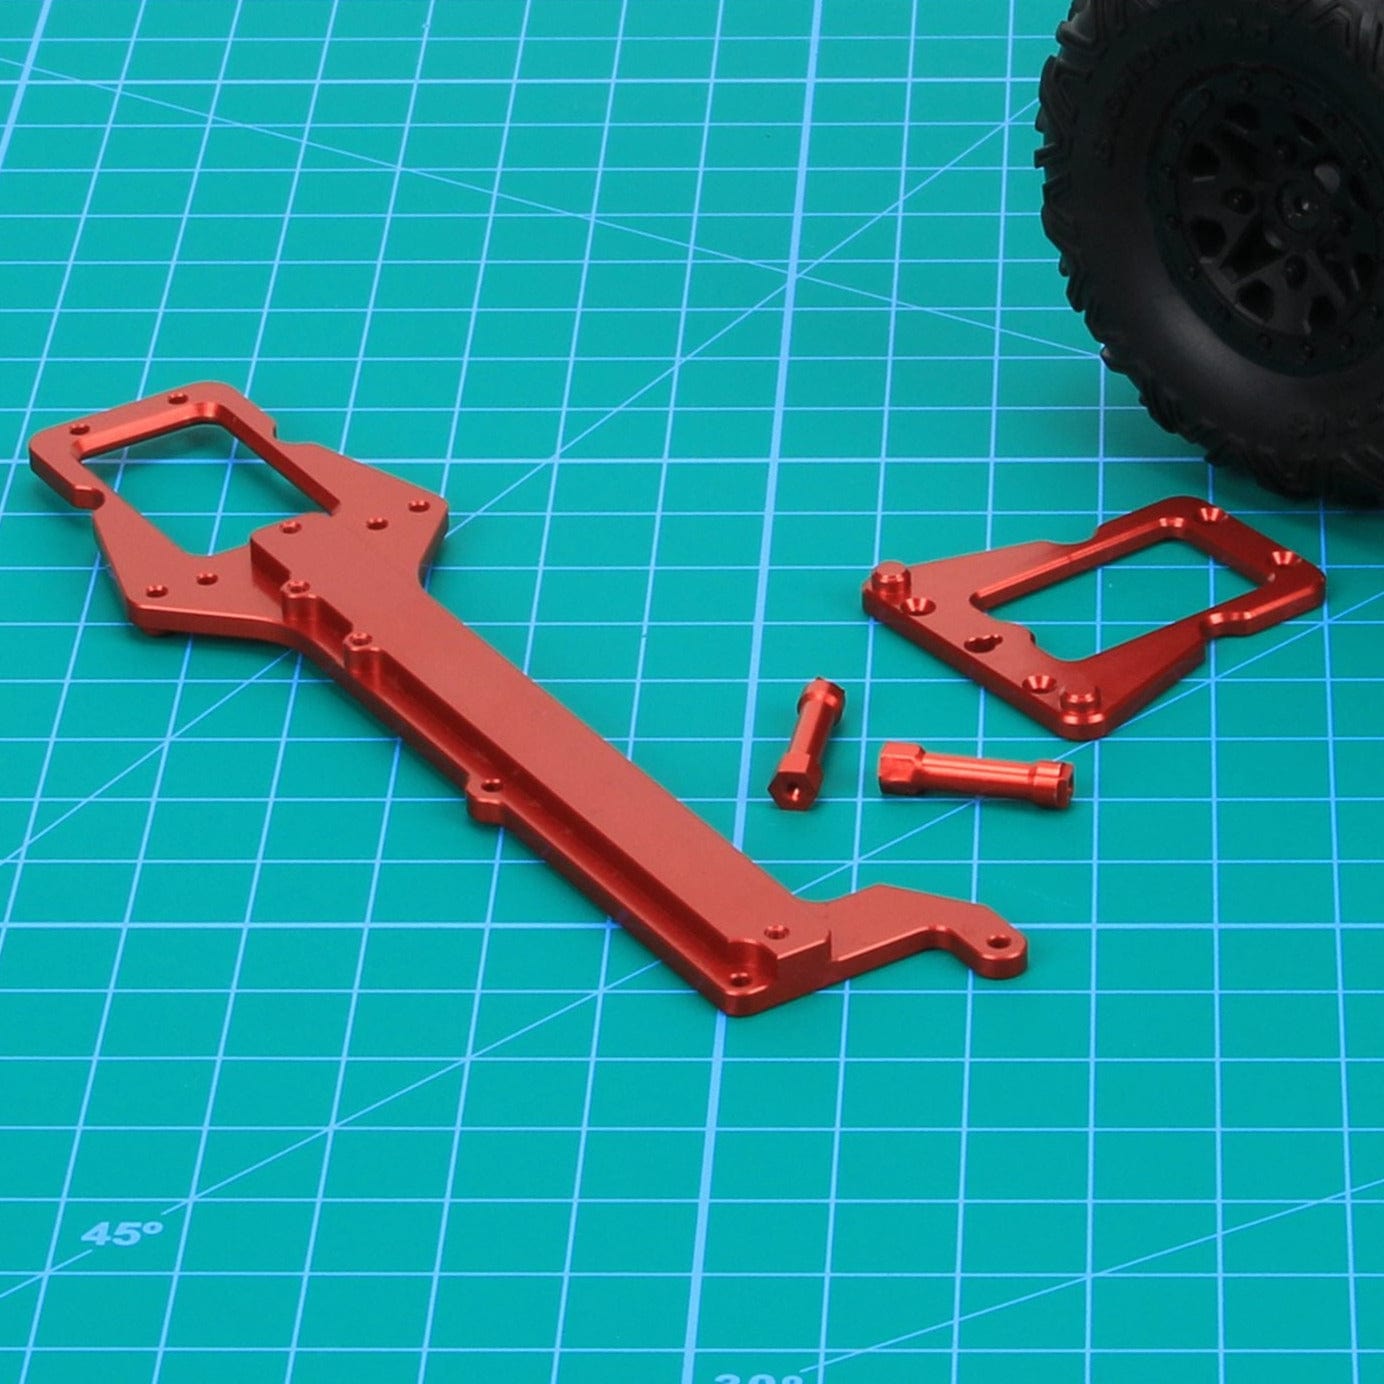 RCAWD TRAXXAS UPGRADE PARTS RCAWD Aluminum Upper Chassis for 1/18 Traxxas Latrax Upgrades